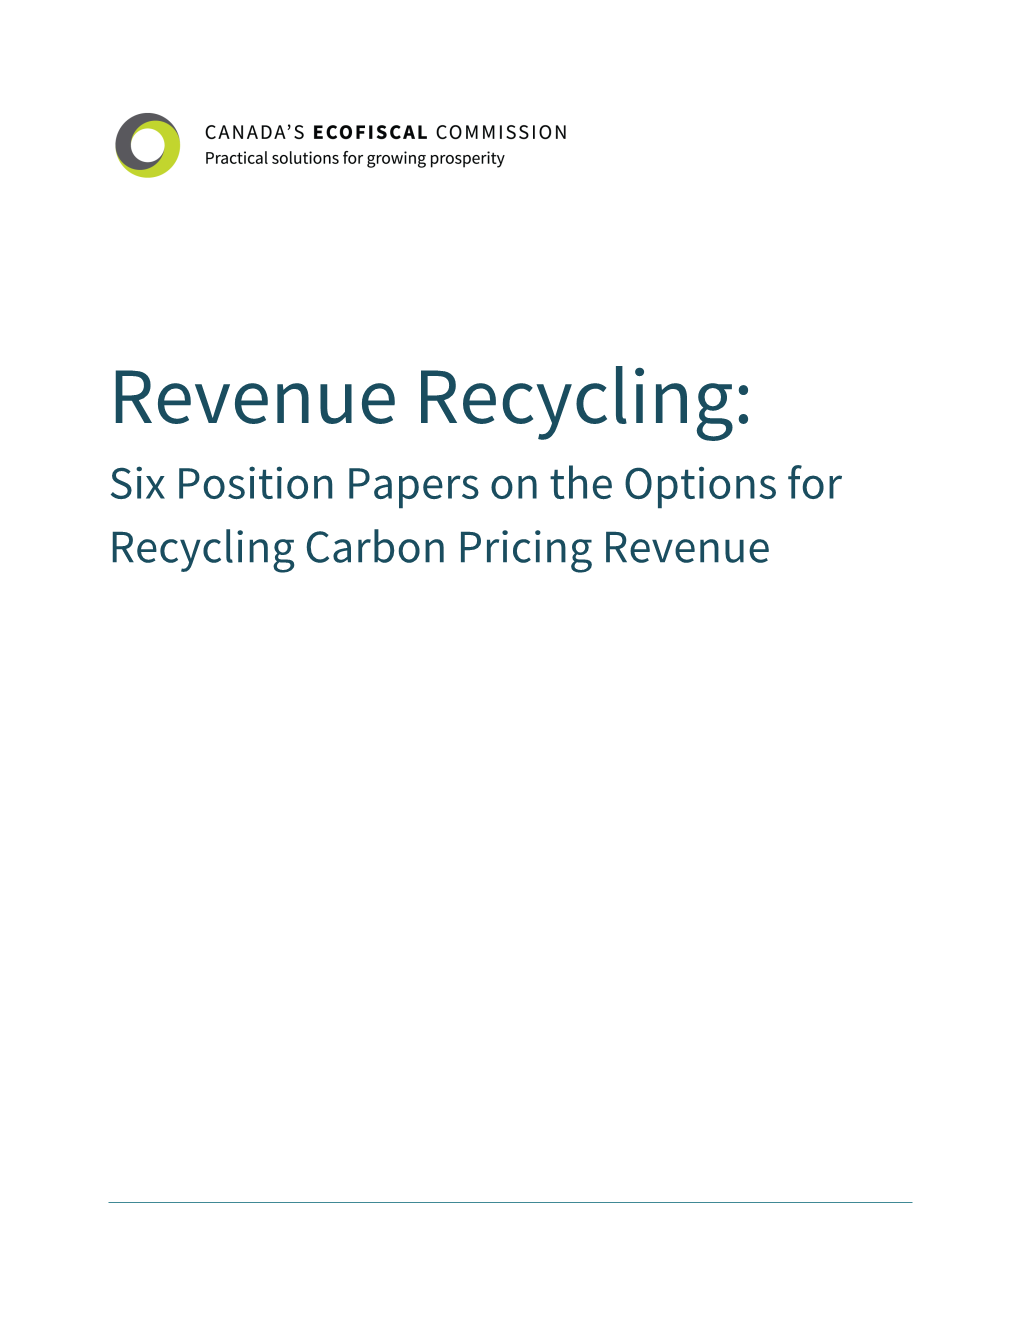 Revenue Recycling: Six Position Papers on the Options for Recycling Carbon Pricing Revenue